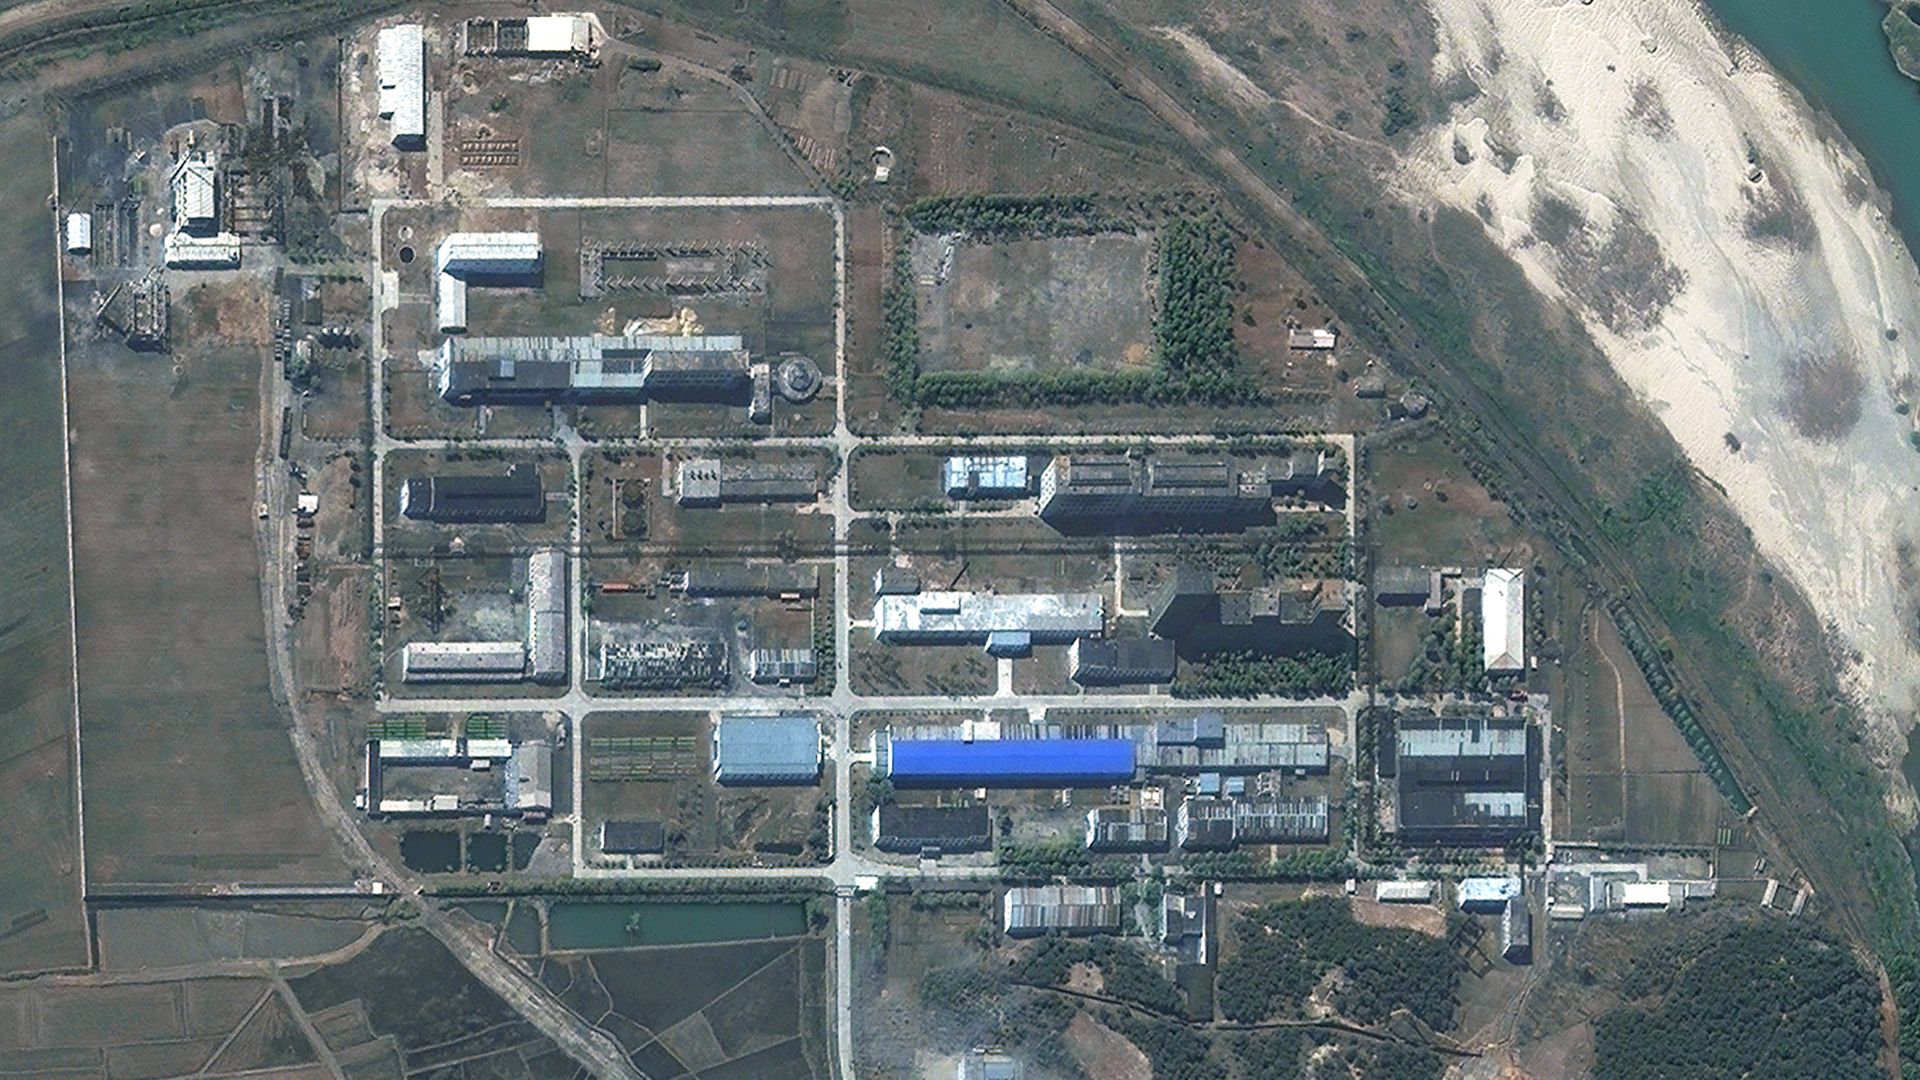 DigitalGlobe imagery of North Korea's 5MWe Reactor at the Yongbyon Nuclear Site in 2012.